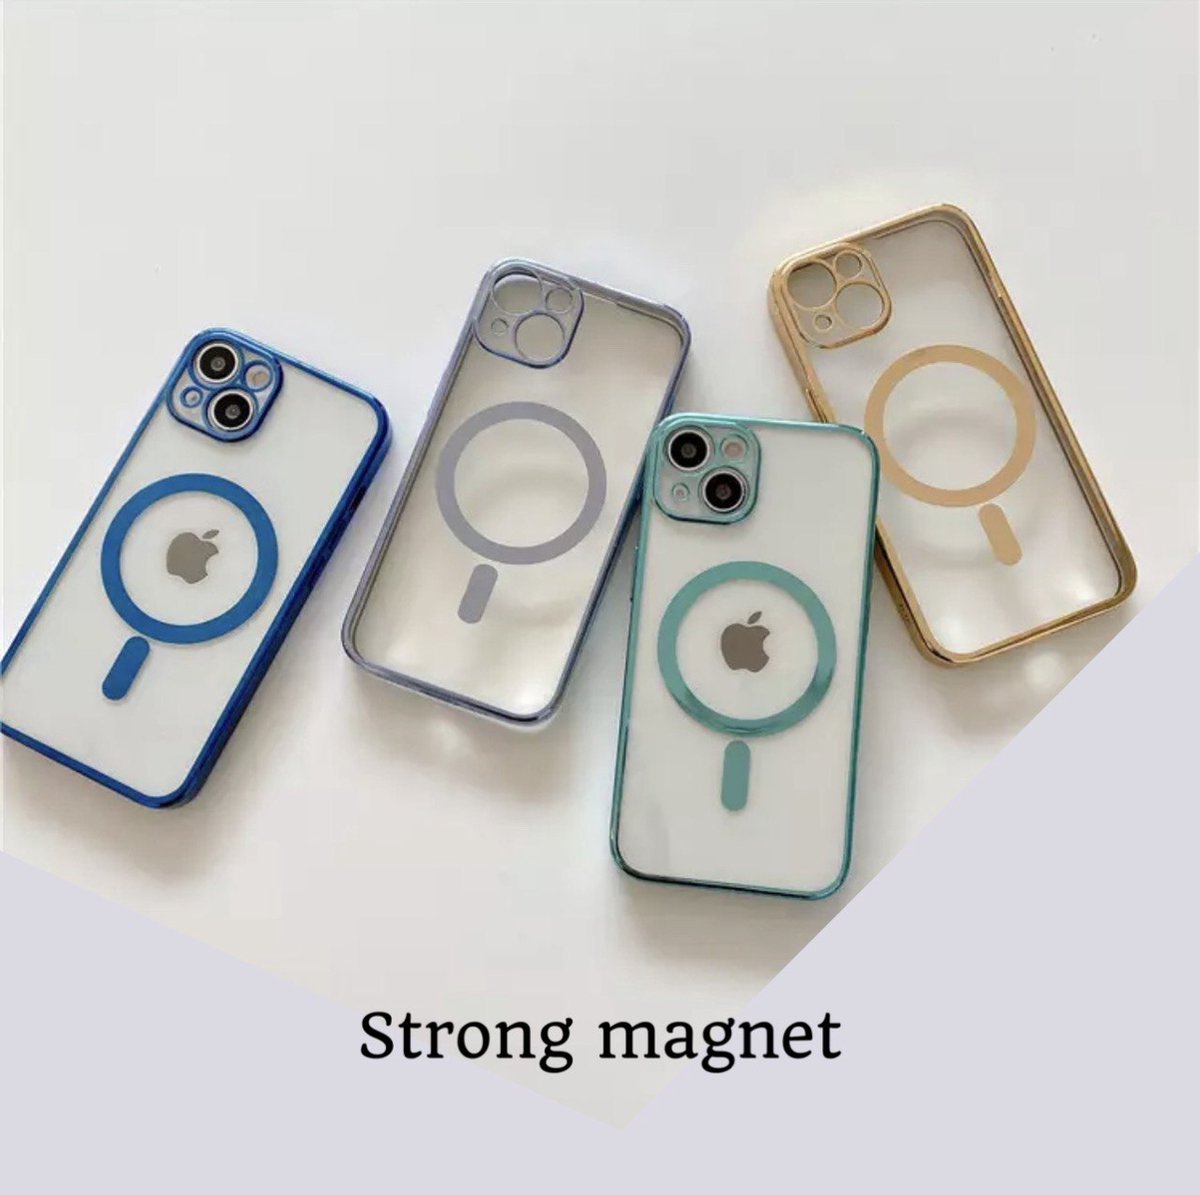 iPhone 12 Pro Max Magnetische Hoesje Transparant-Donker blauw- Magnetisch Hoesje met Ring iPhone 12 Pro Max - iPhone 12 Pro Max Magneet Case